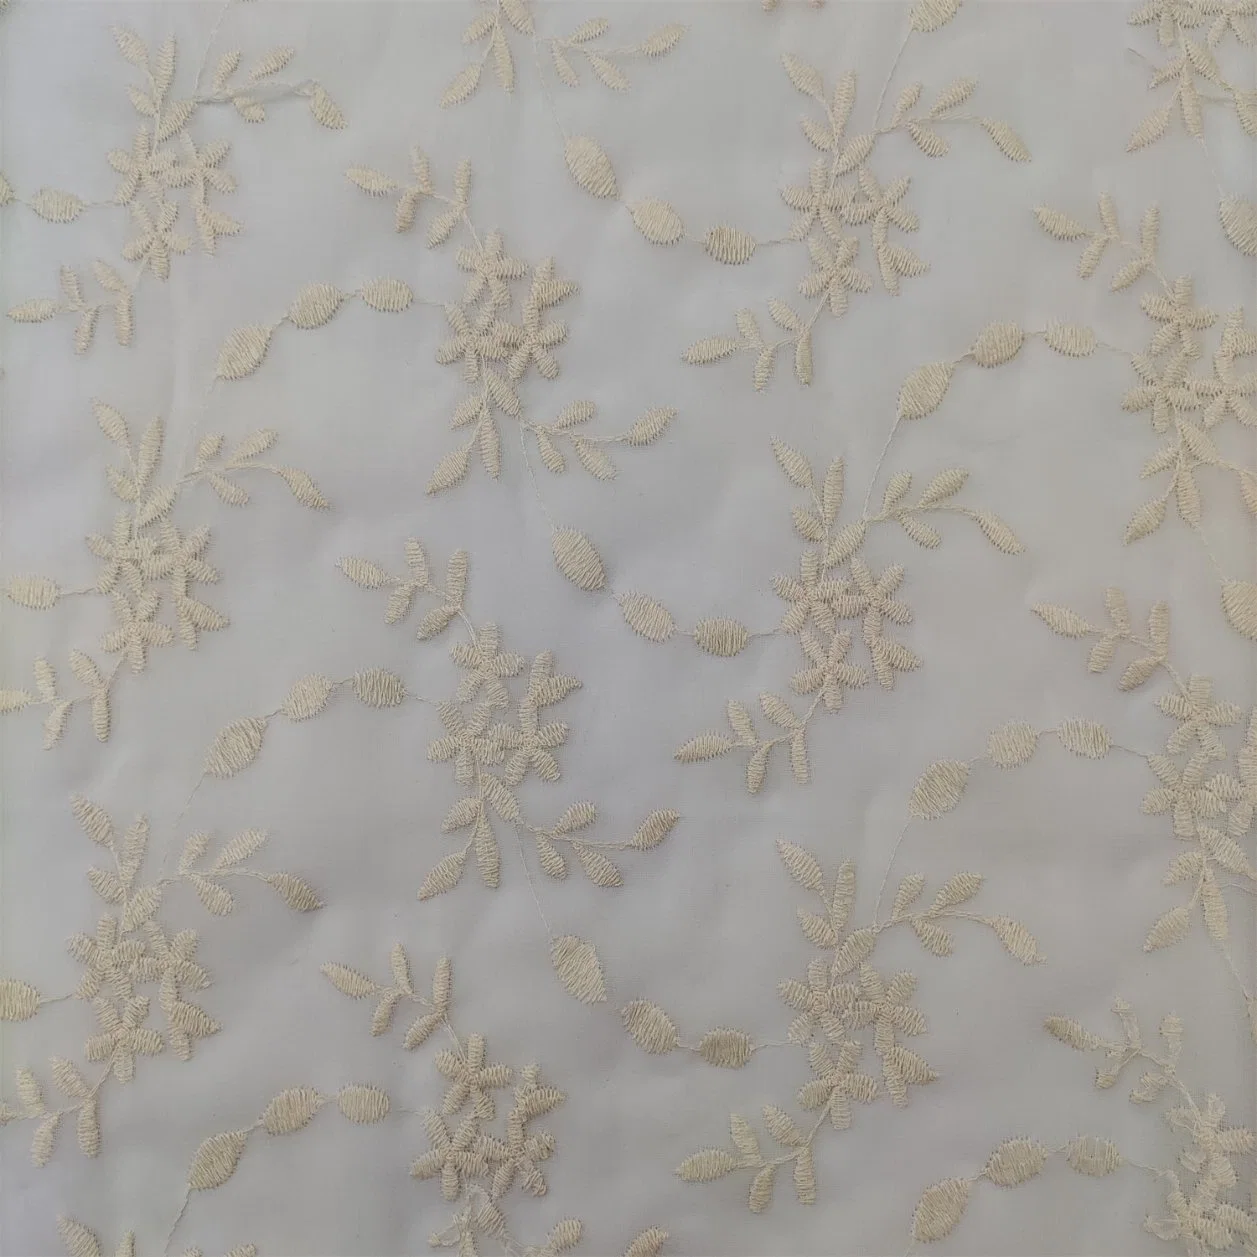 Polyester Chiffon White Leaf Flower Embroidery Fabric for Garment Fabric Dclothes